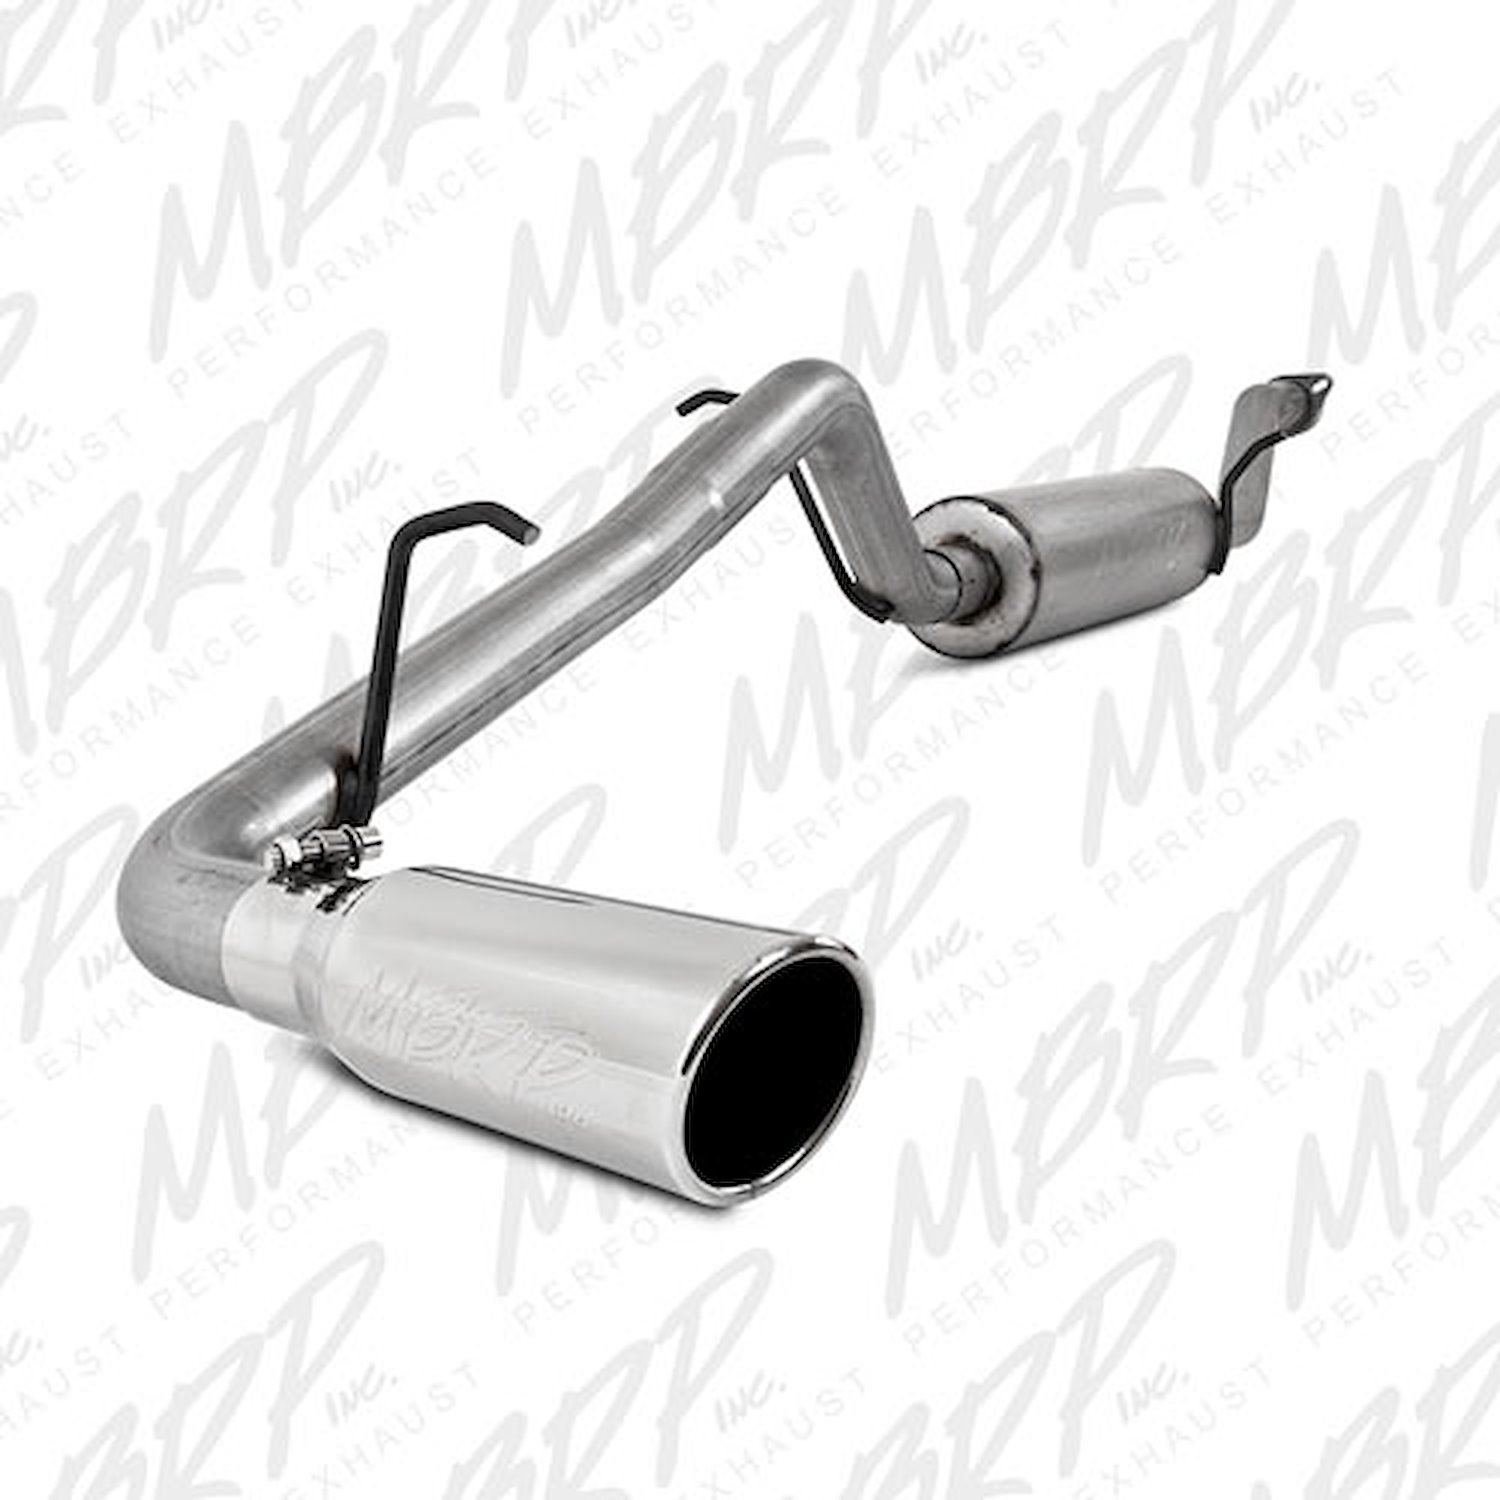 Installer Series Exhaust System 2007-2011 GM Colorado/Canyon 2.8/2.9/3.5/3.7L